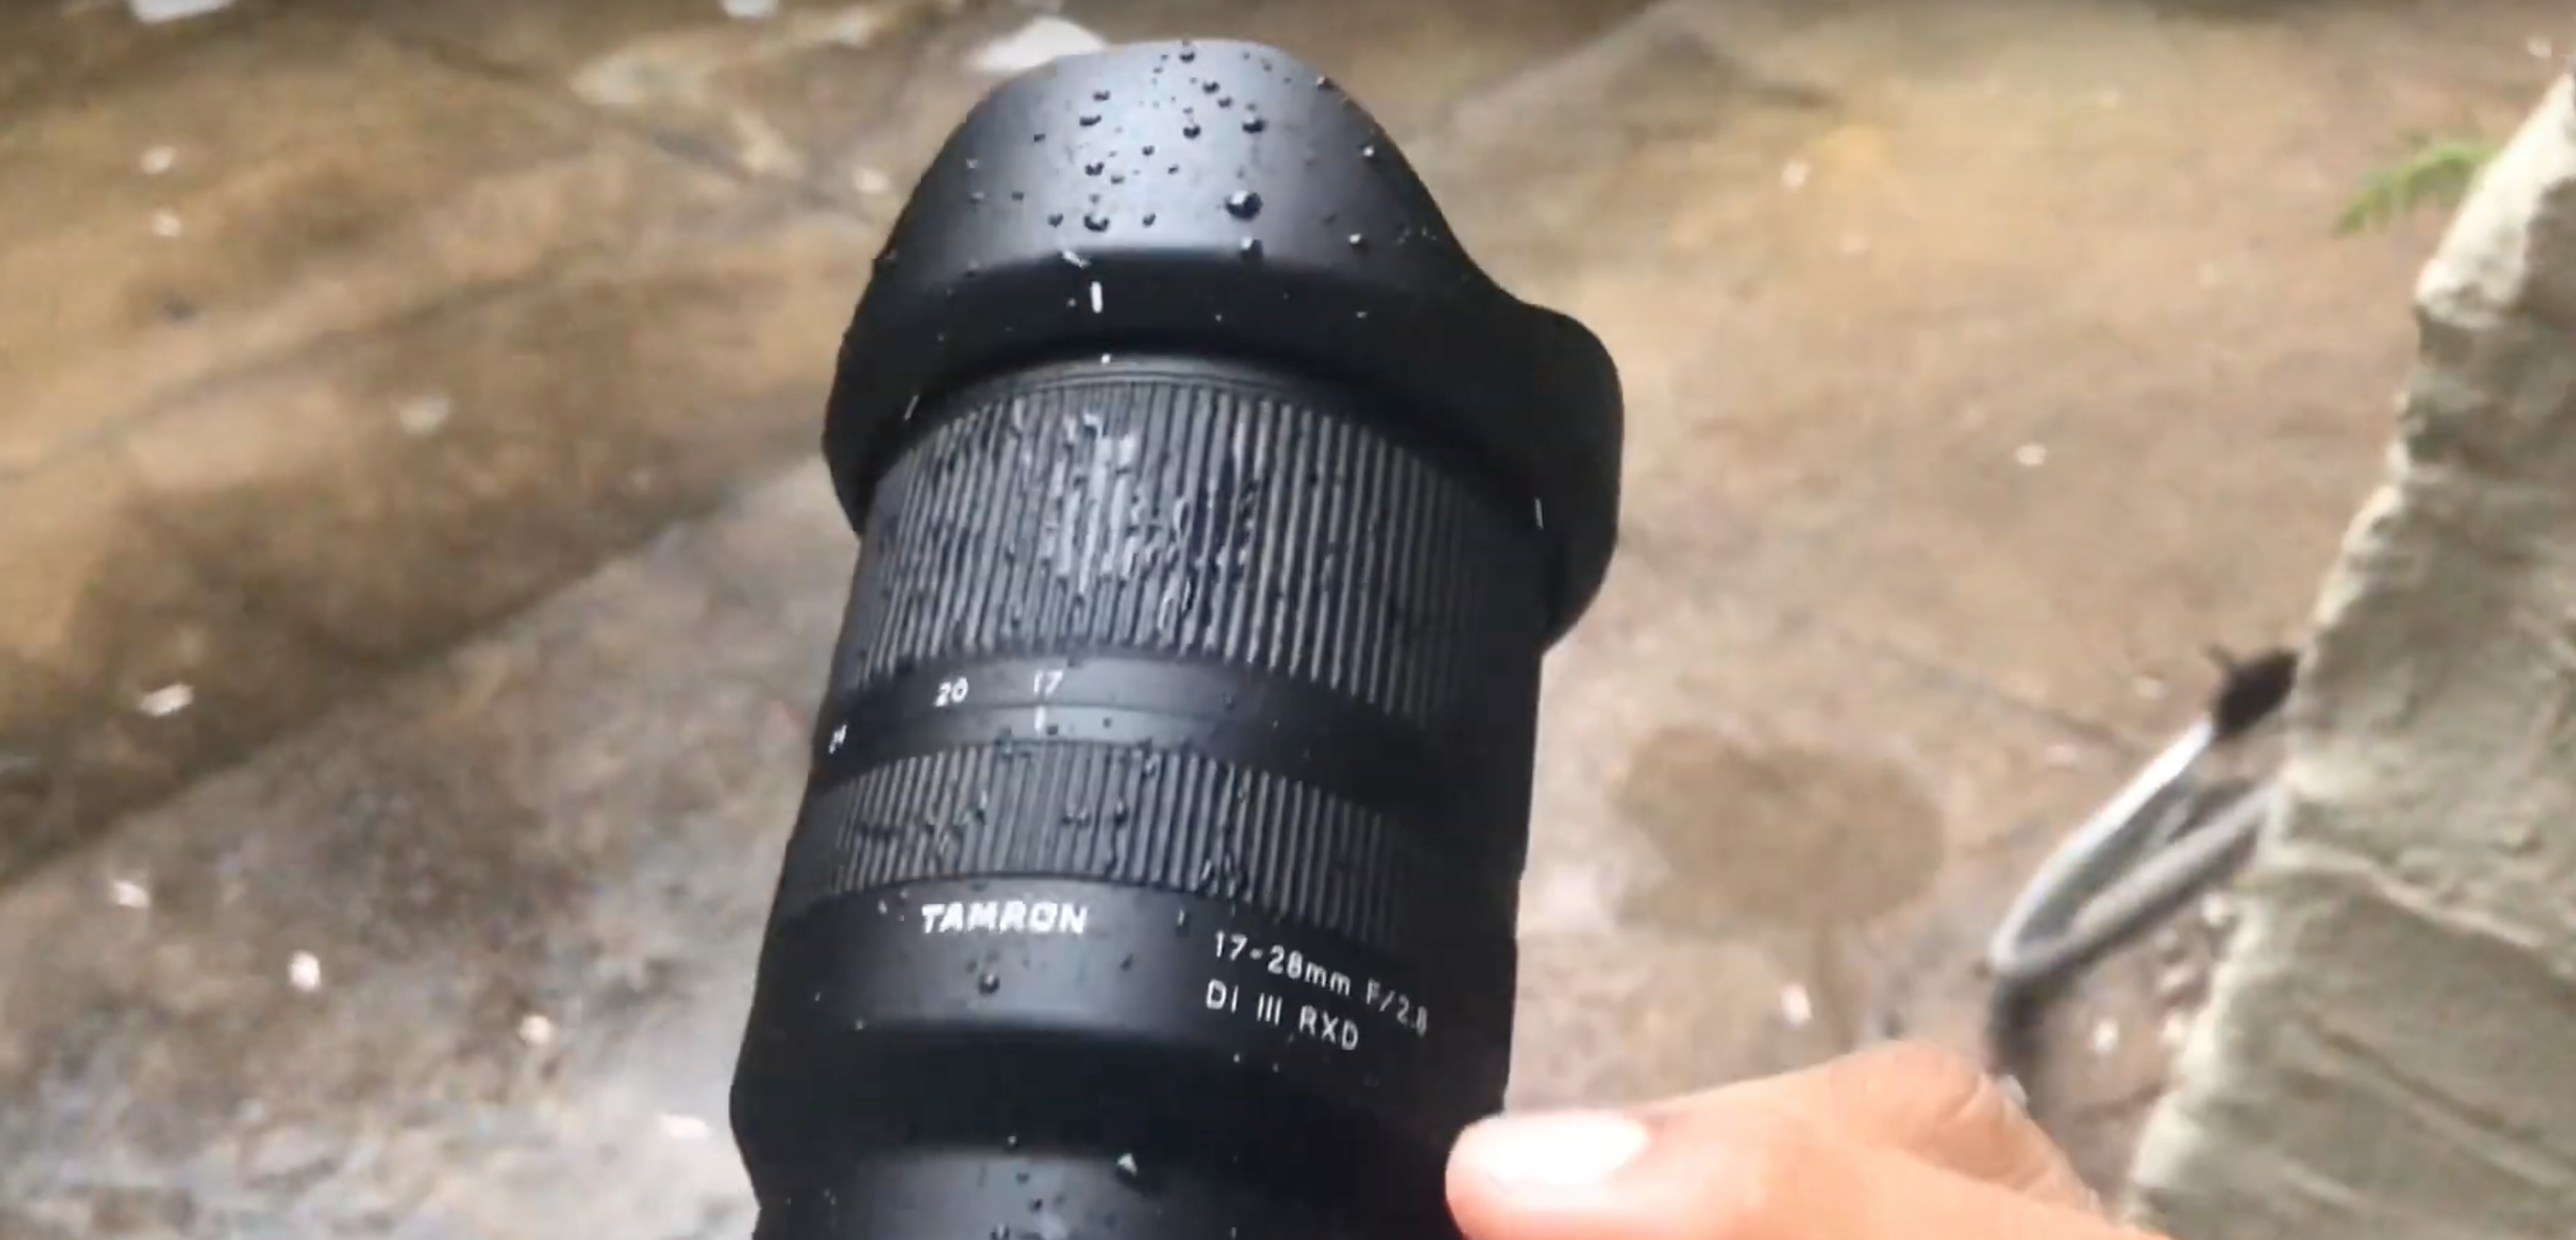 The Tamron 17-28mm F2.8 Di III RXD Survived an Insane Rainfall in NYC